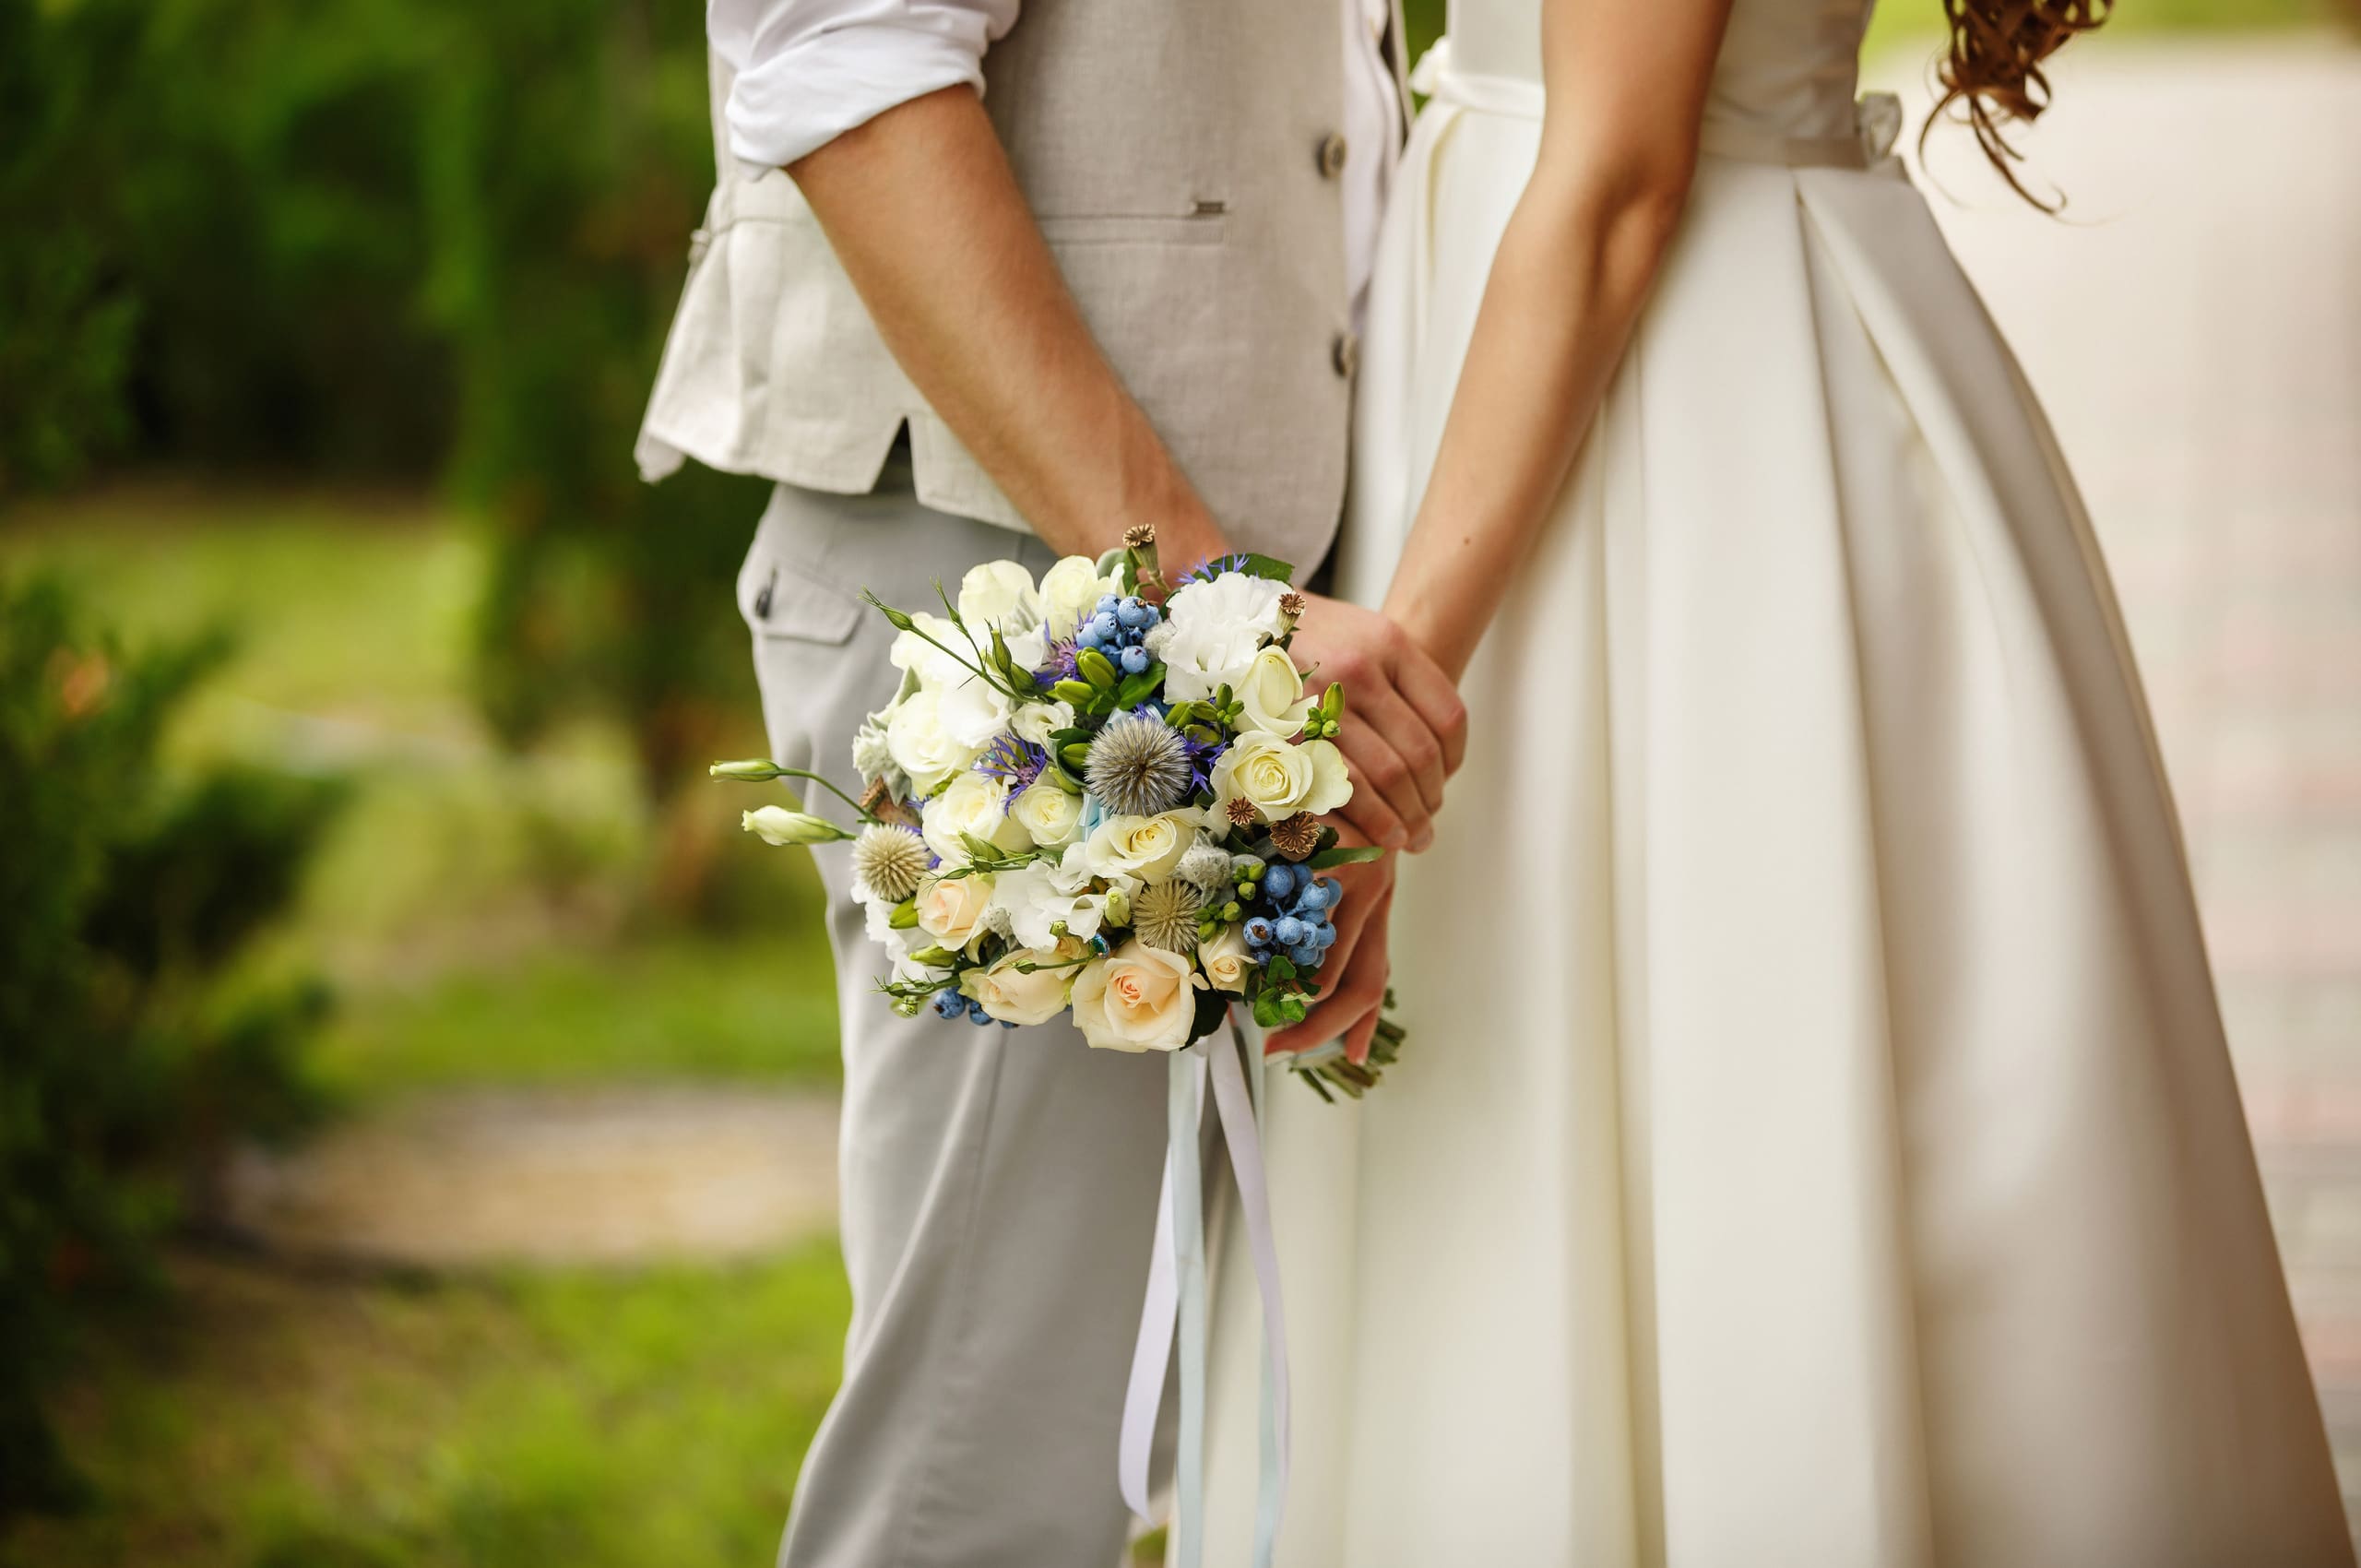 Getting married? Here’s why you should review your will and wishes